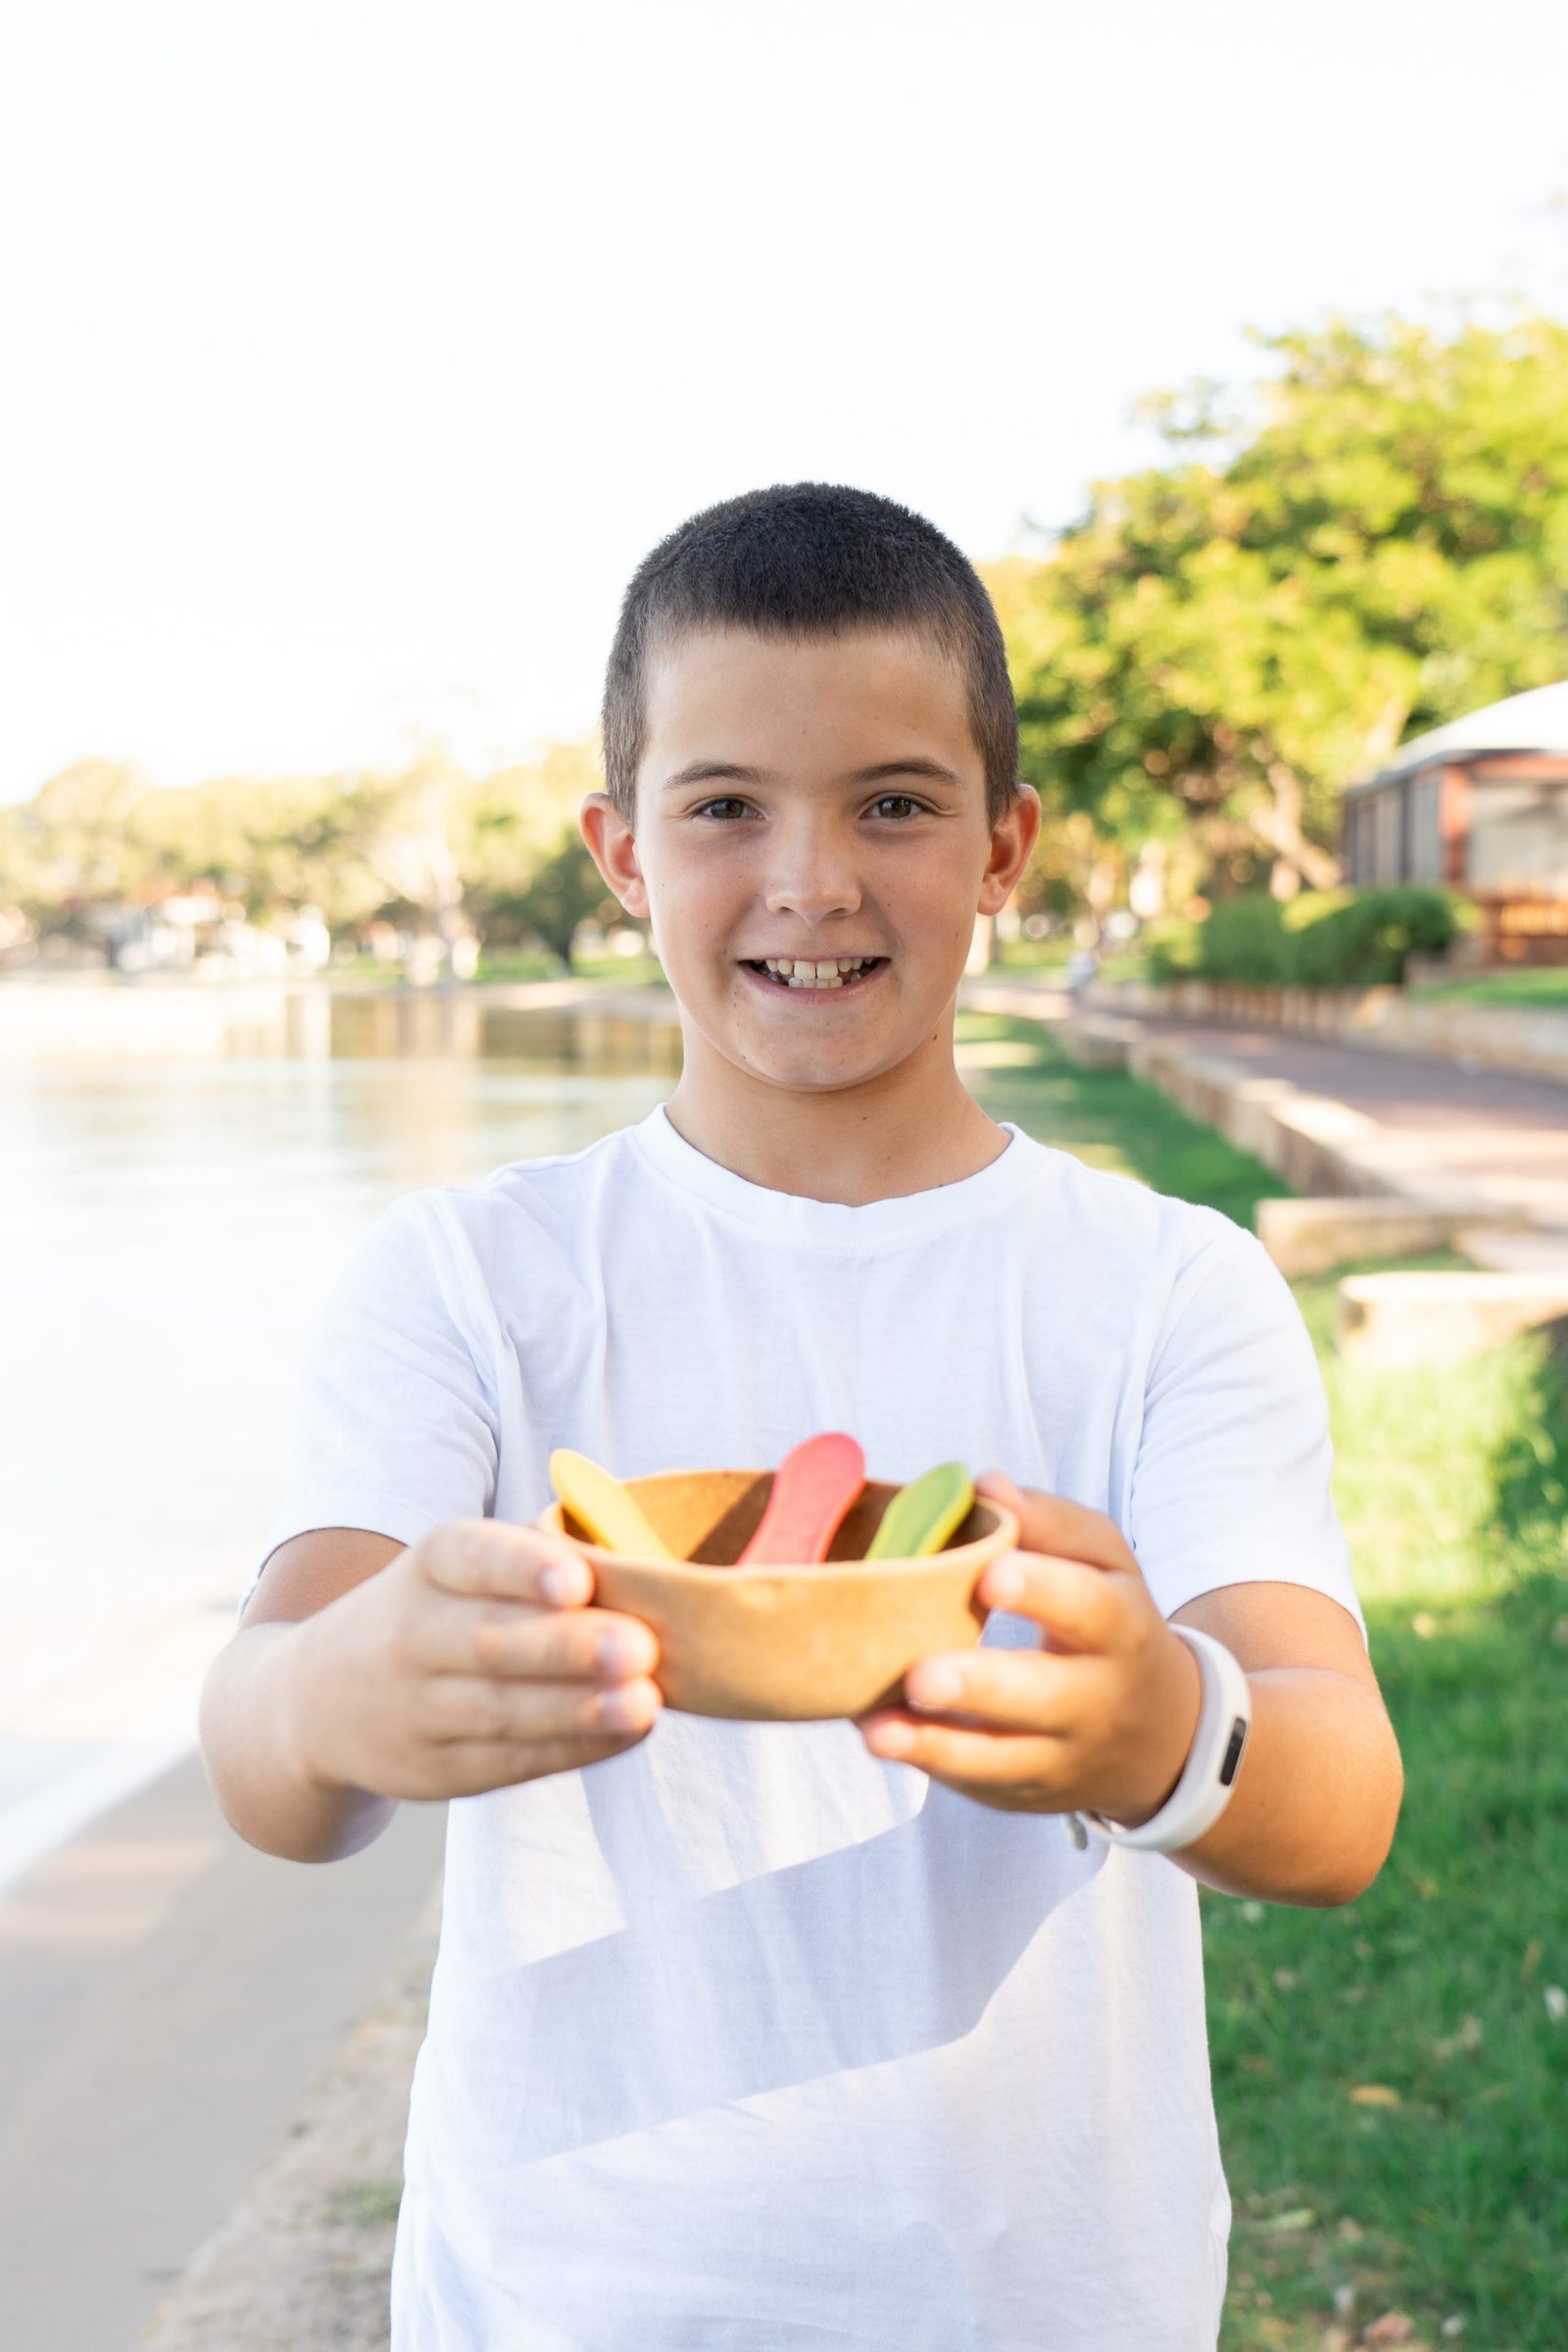 Savouring sweets with a smile, this happy boy enjoys dessert in our edible bowls and spoons!